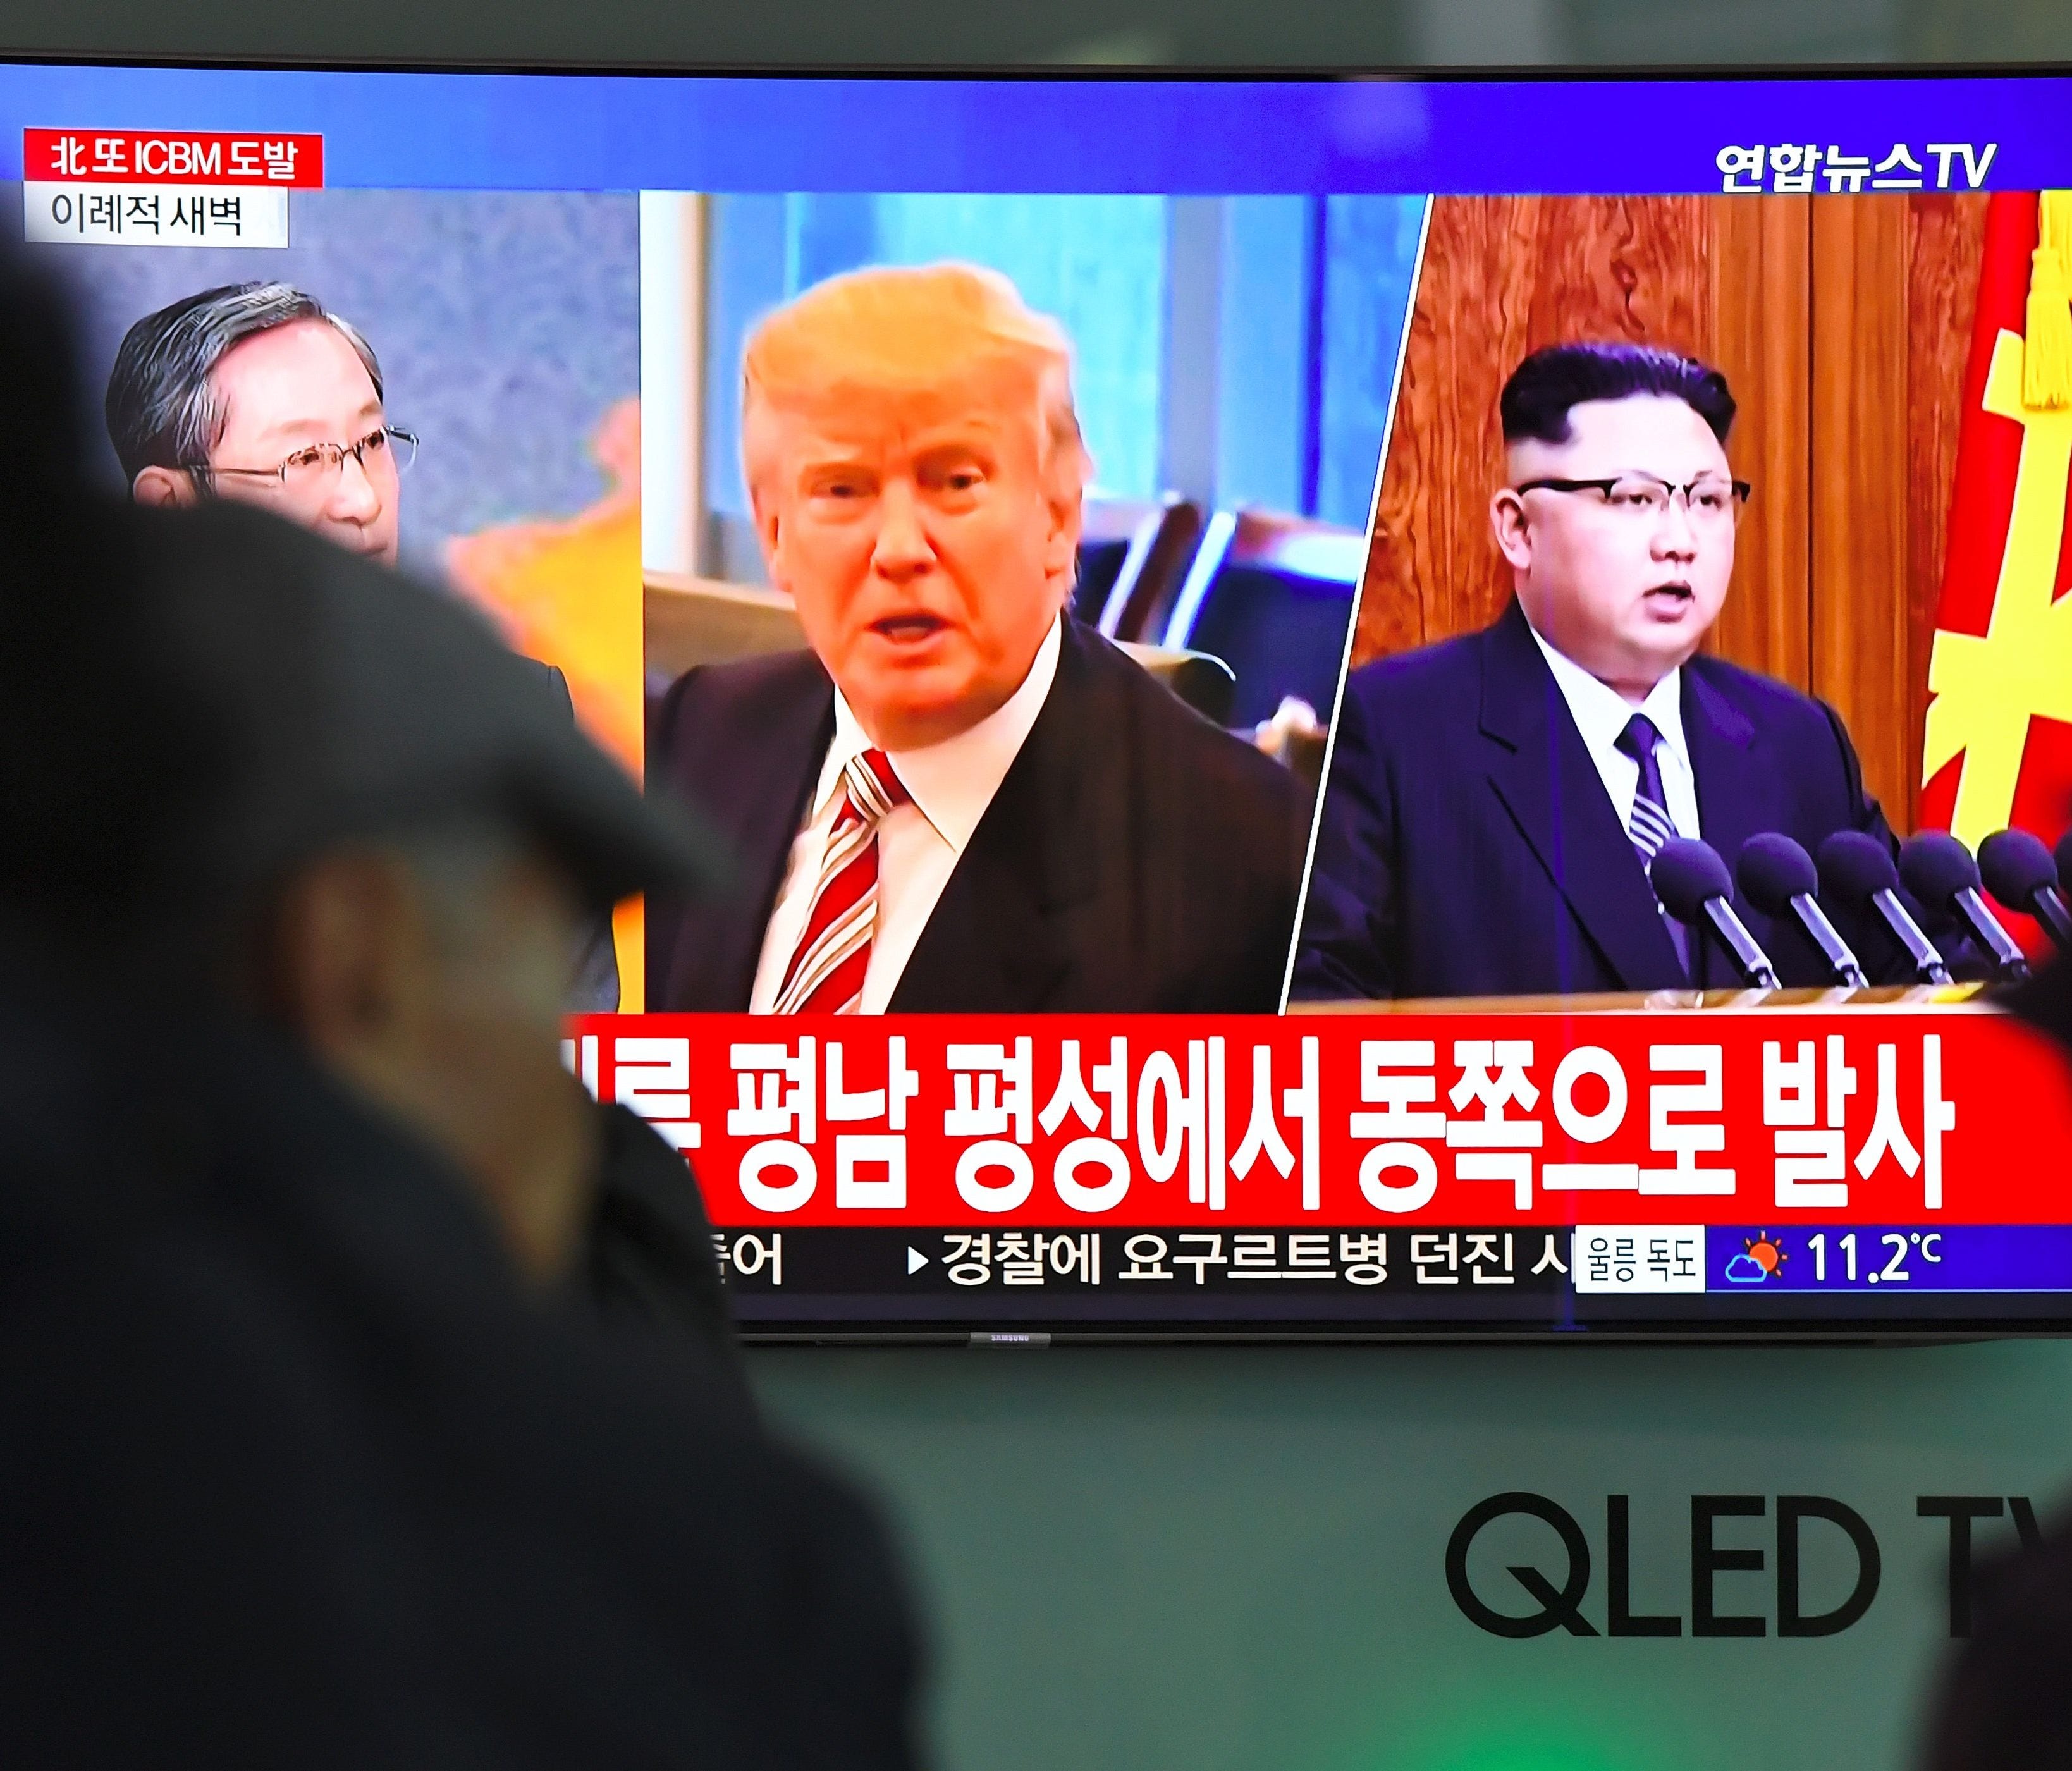 People watch a television news screen showing pictures of President Trump and North Korean leader Kim Jong Un at a railway station in Seoul on Nov. 29, 2017.